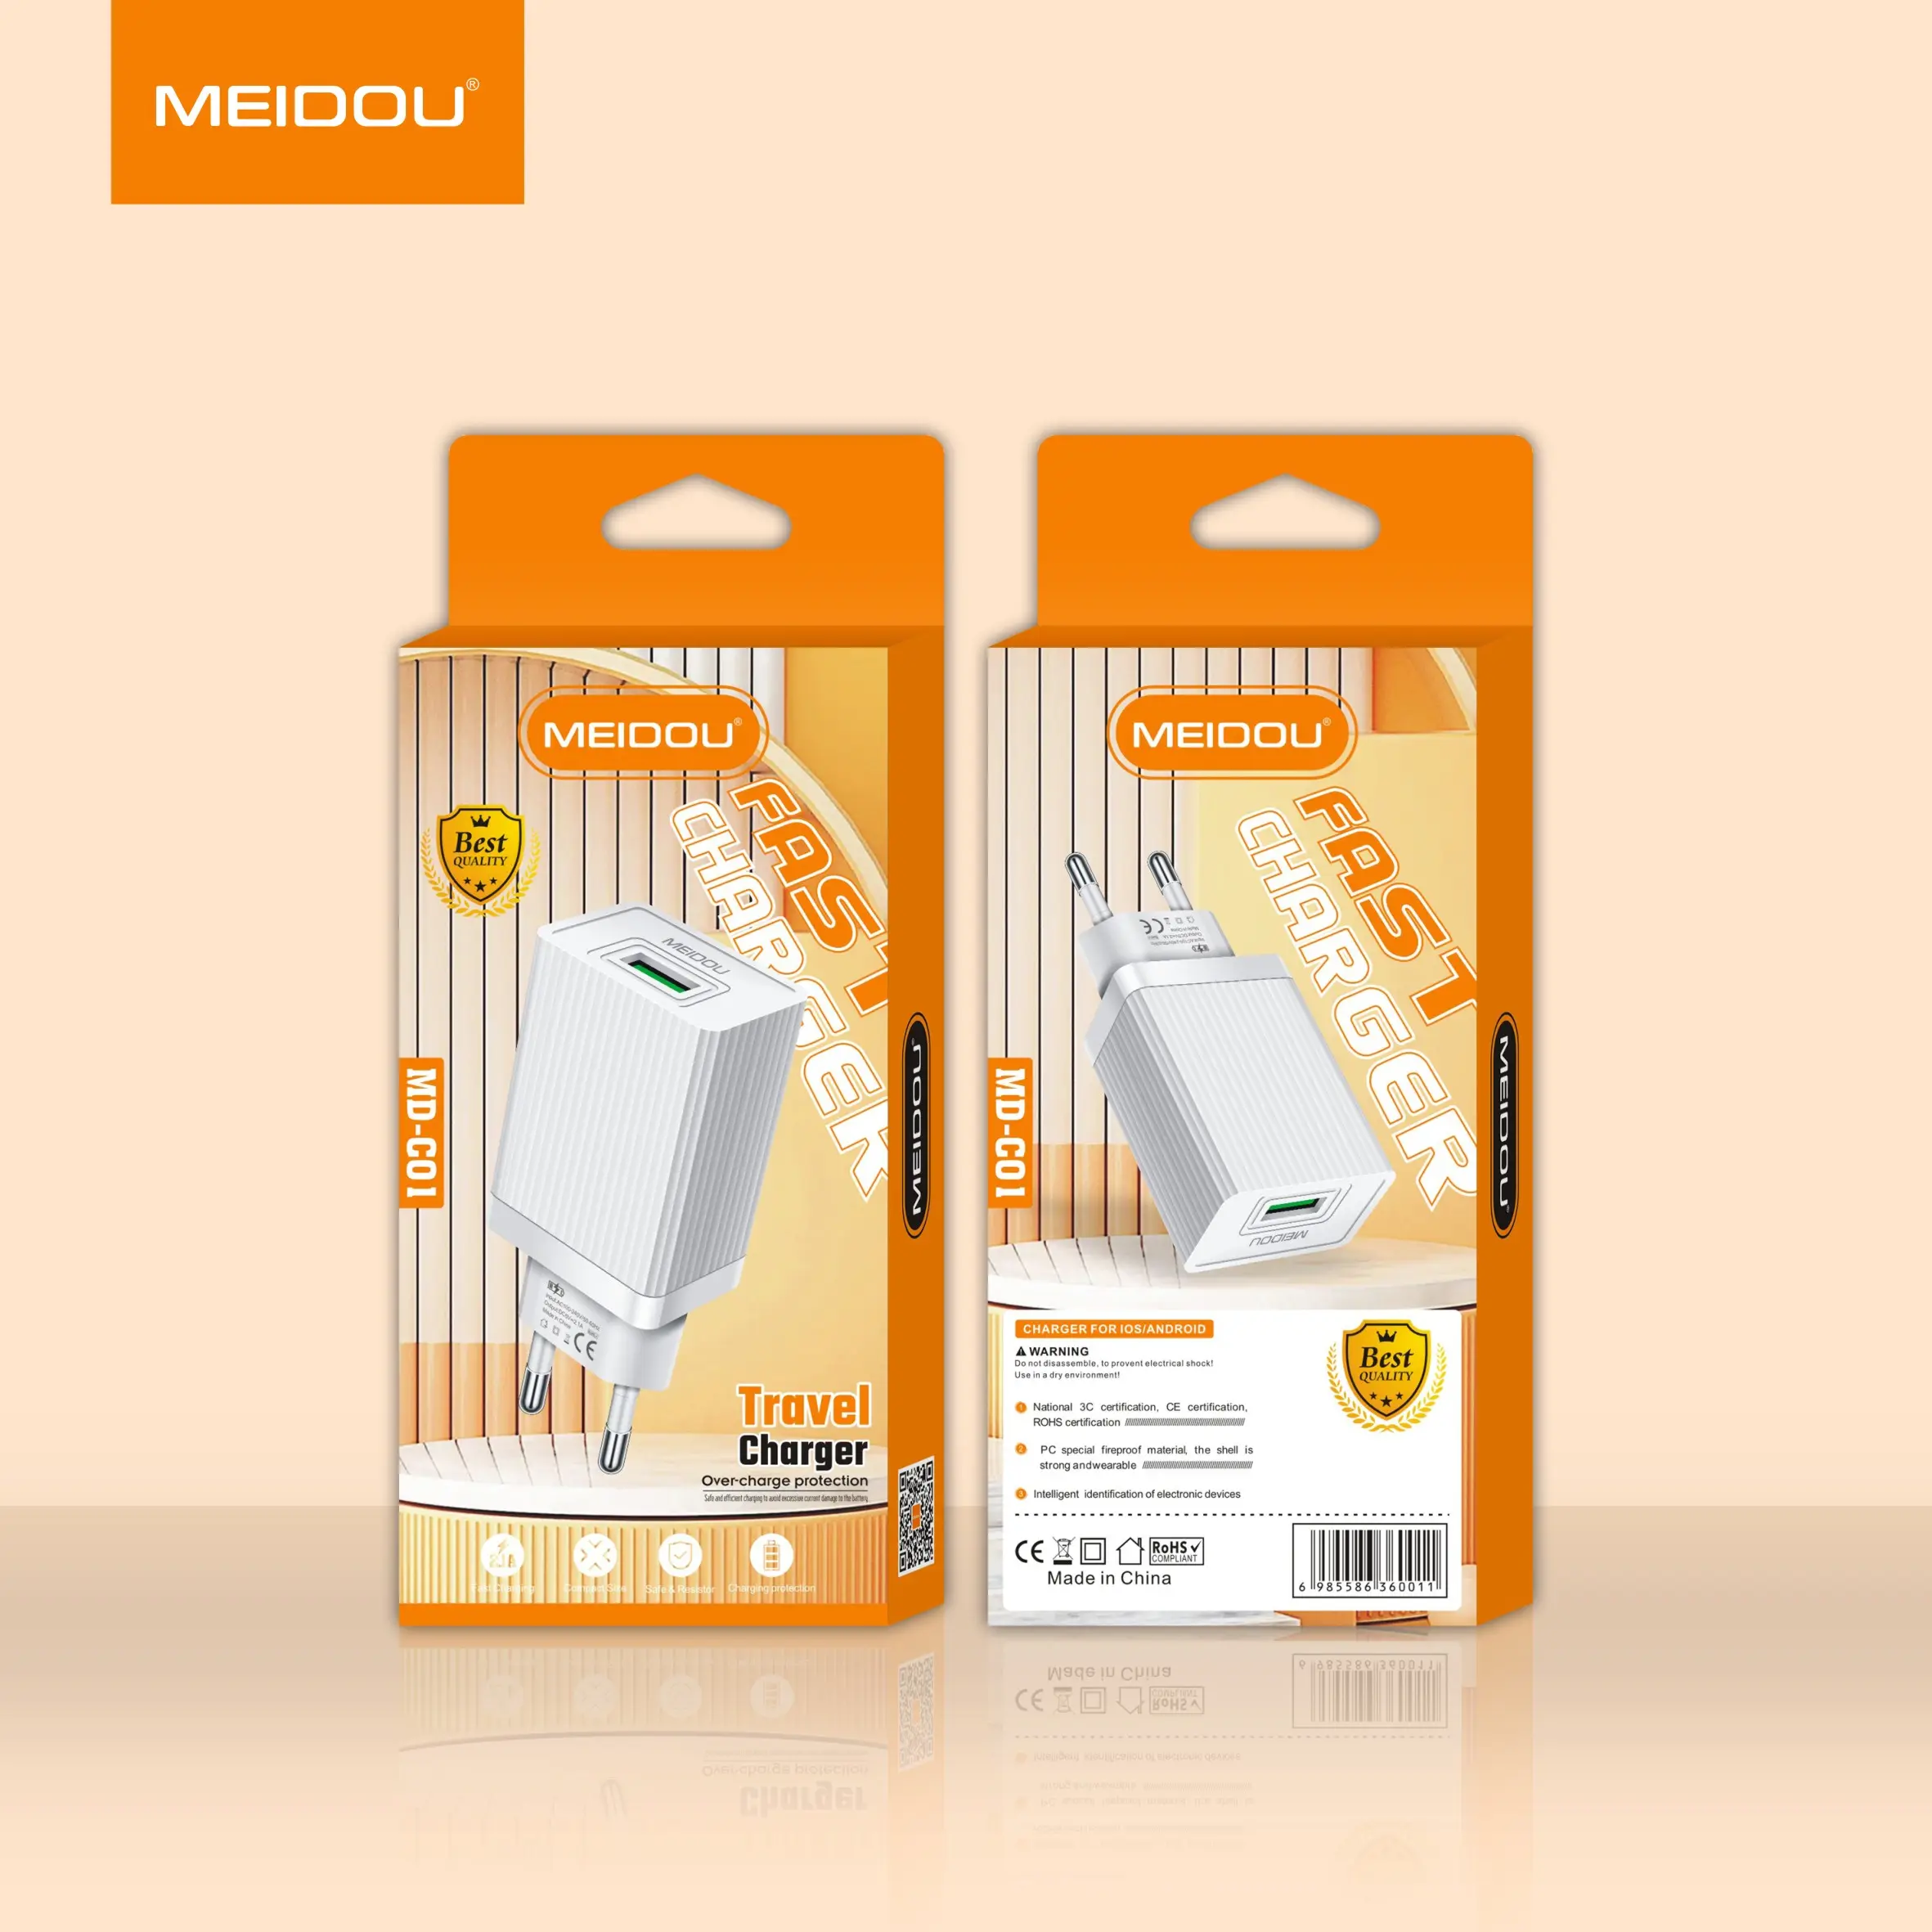 MEIDOU C01 best selling products 2023 Charger 5V 2.4-3A iphone charger fast charging with cables 1Usb EU fast Charger